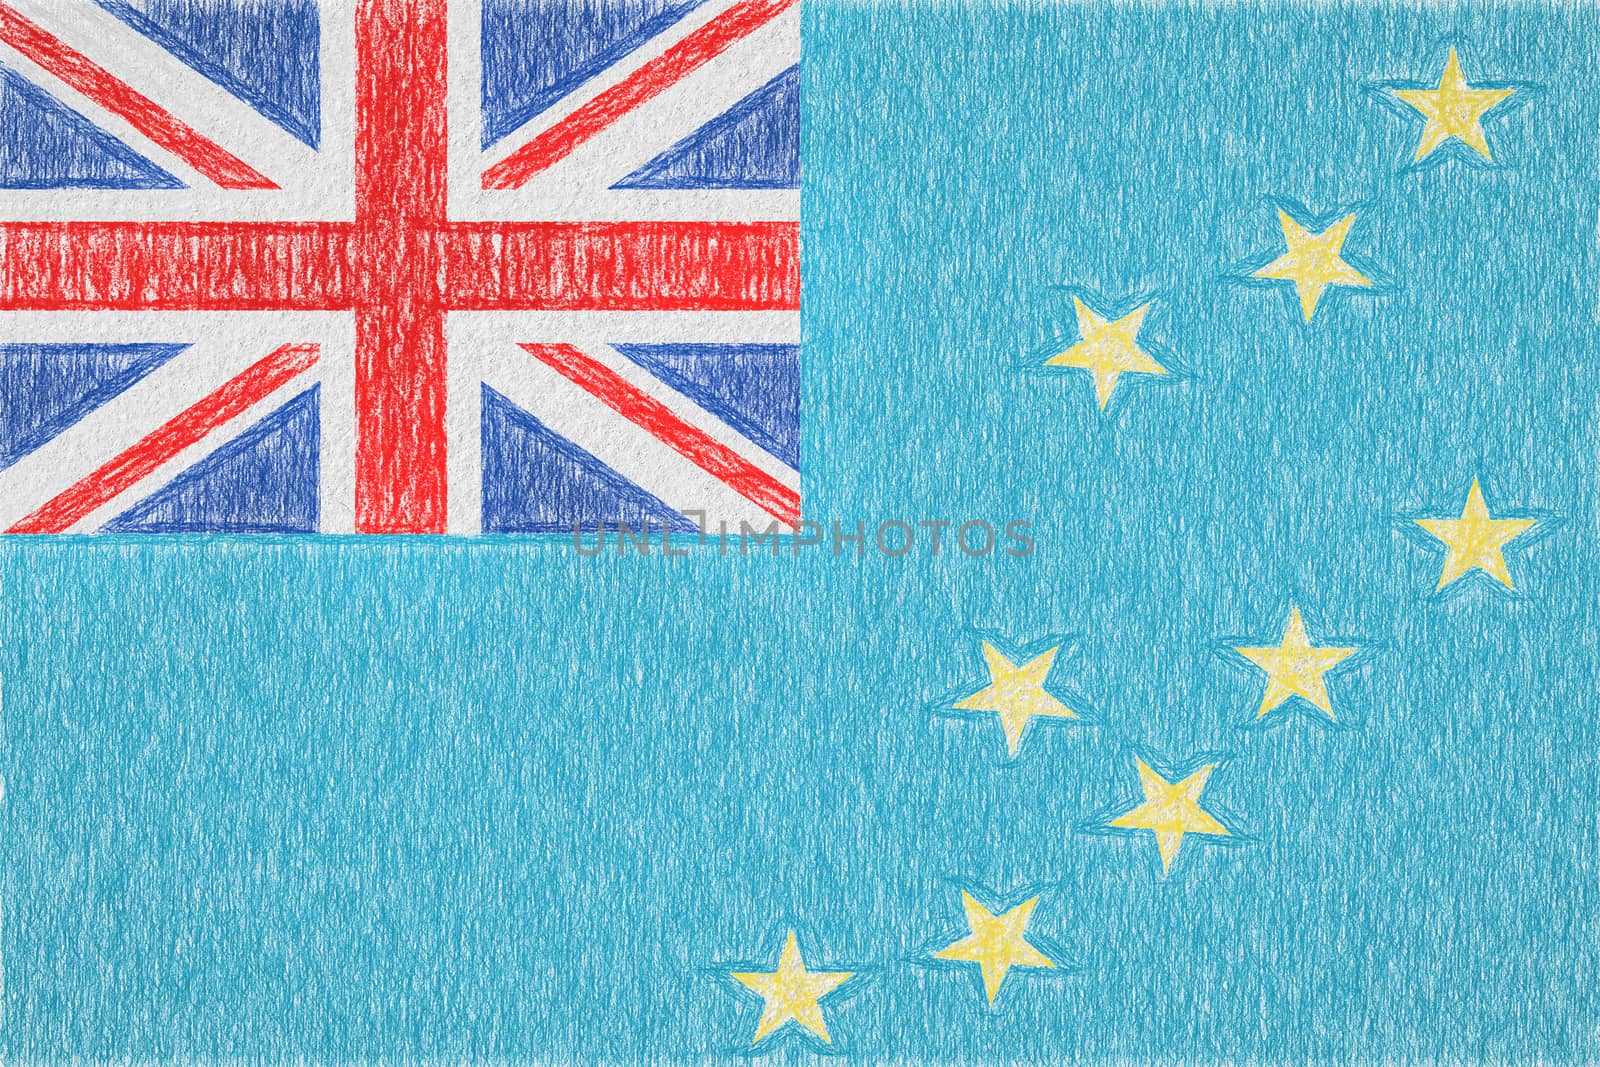 Tuvalu painted flag by Visual-Content